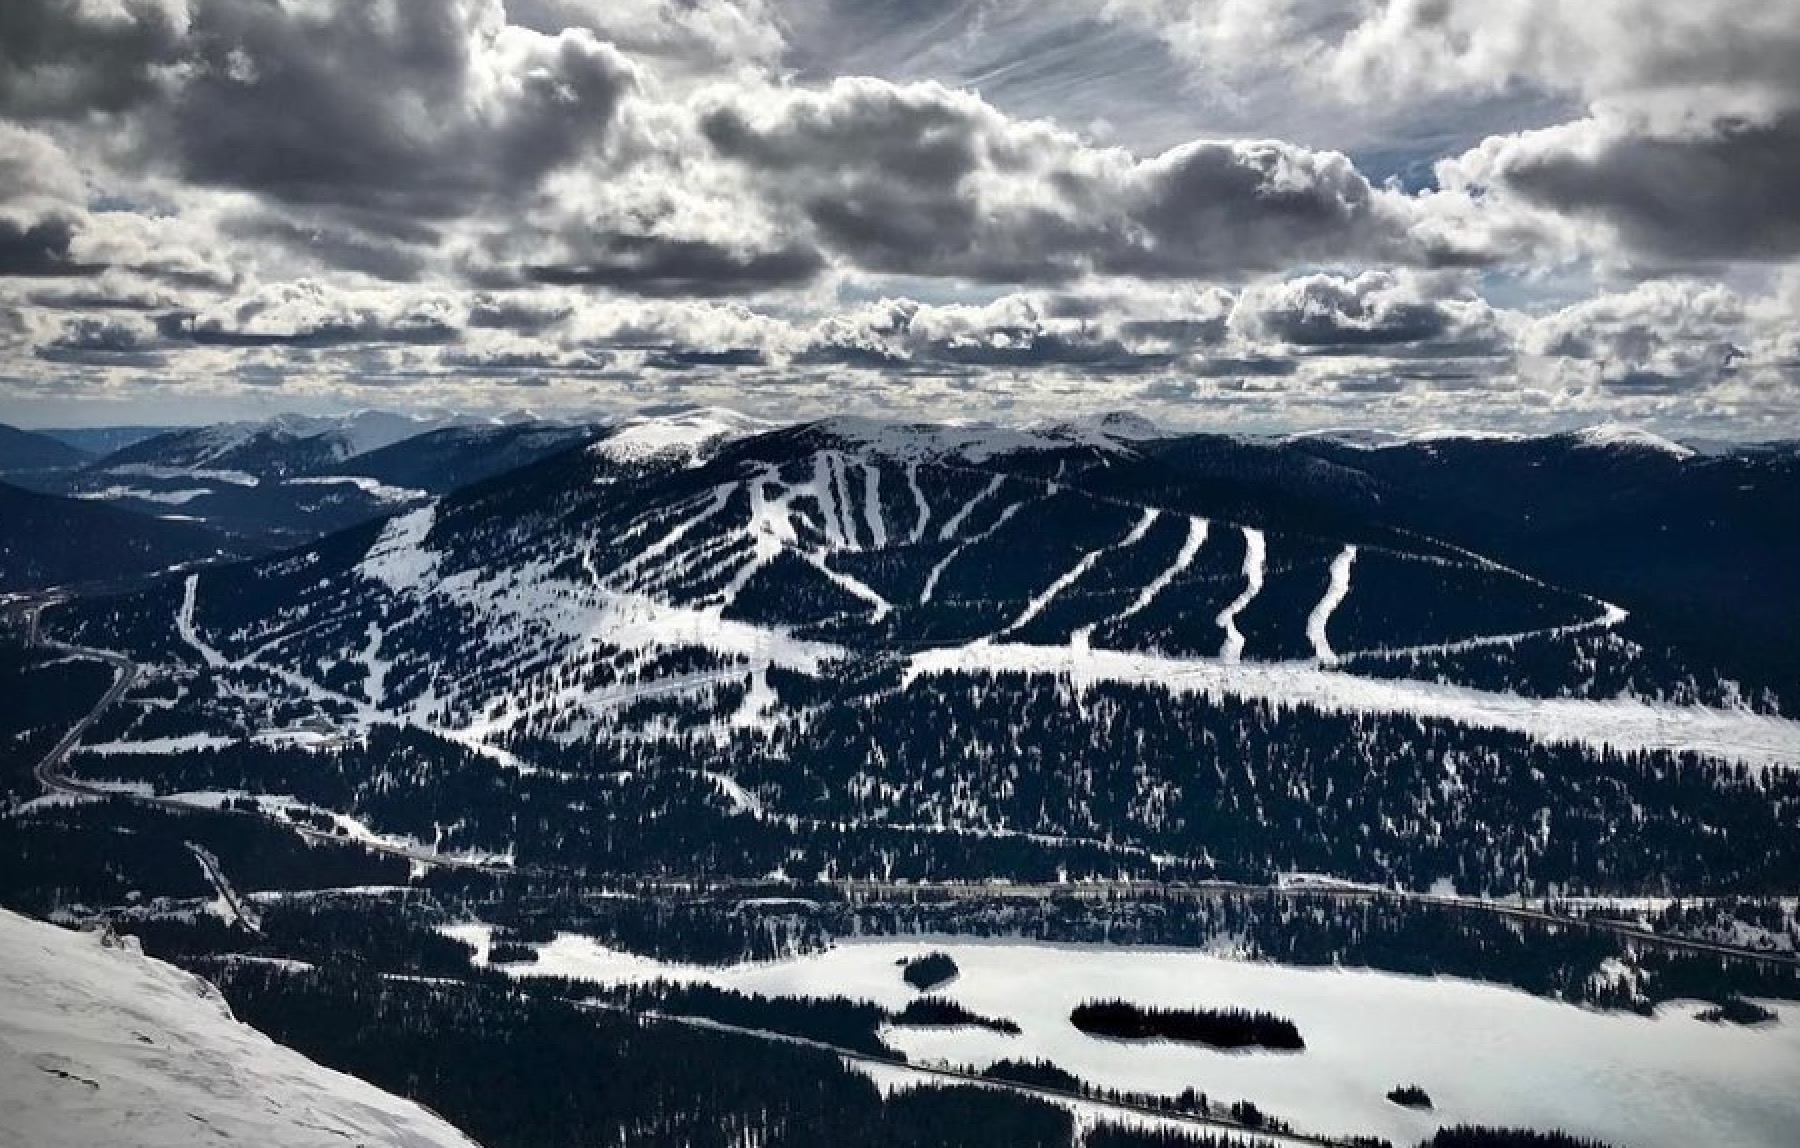 FOR SALE: Canadian Ski Resort With 900+  Skiable Acres Skiable ($8.25 Million)